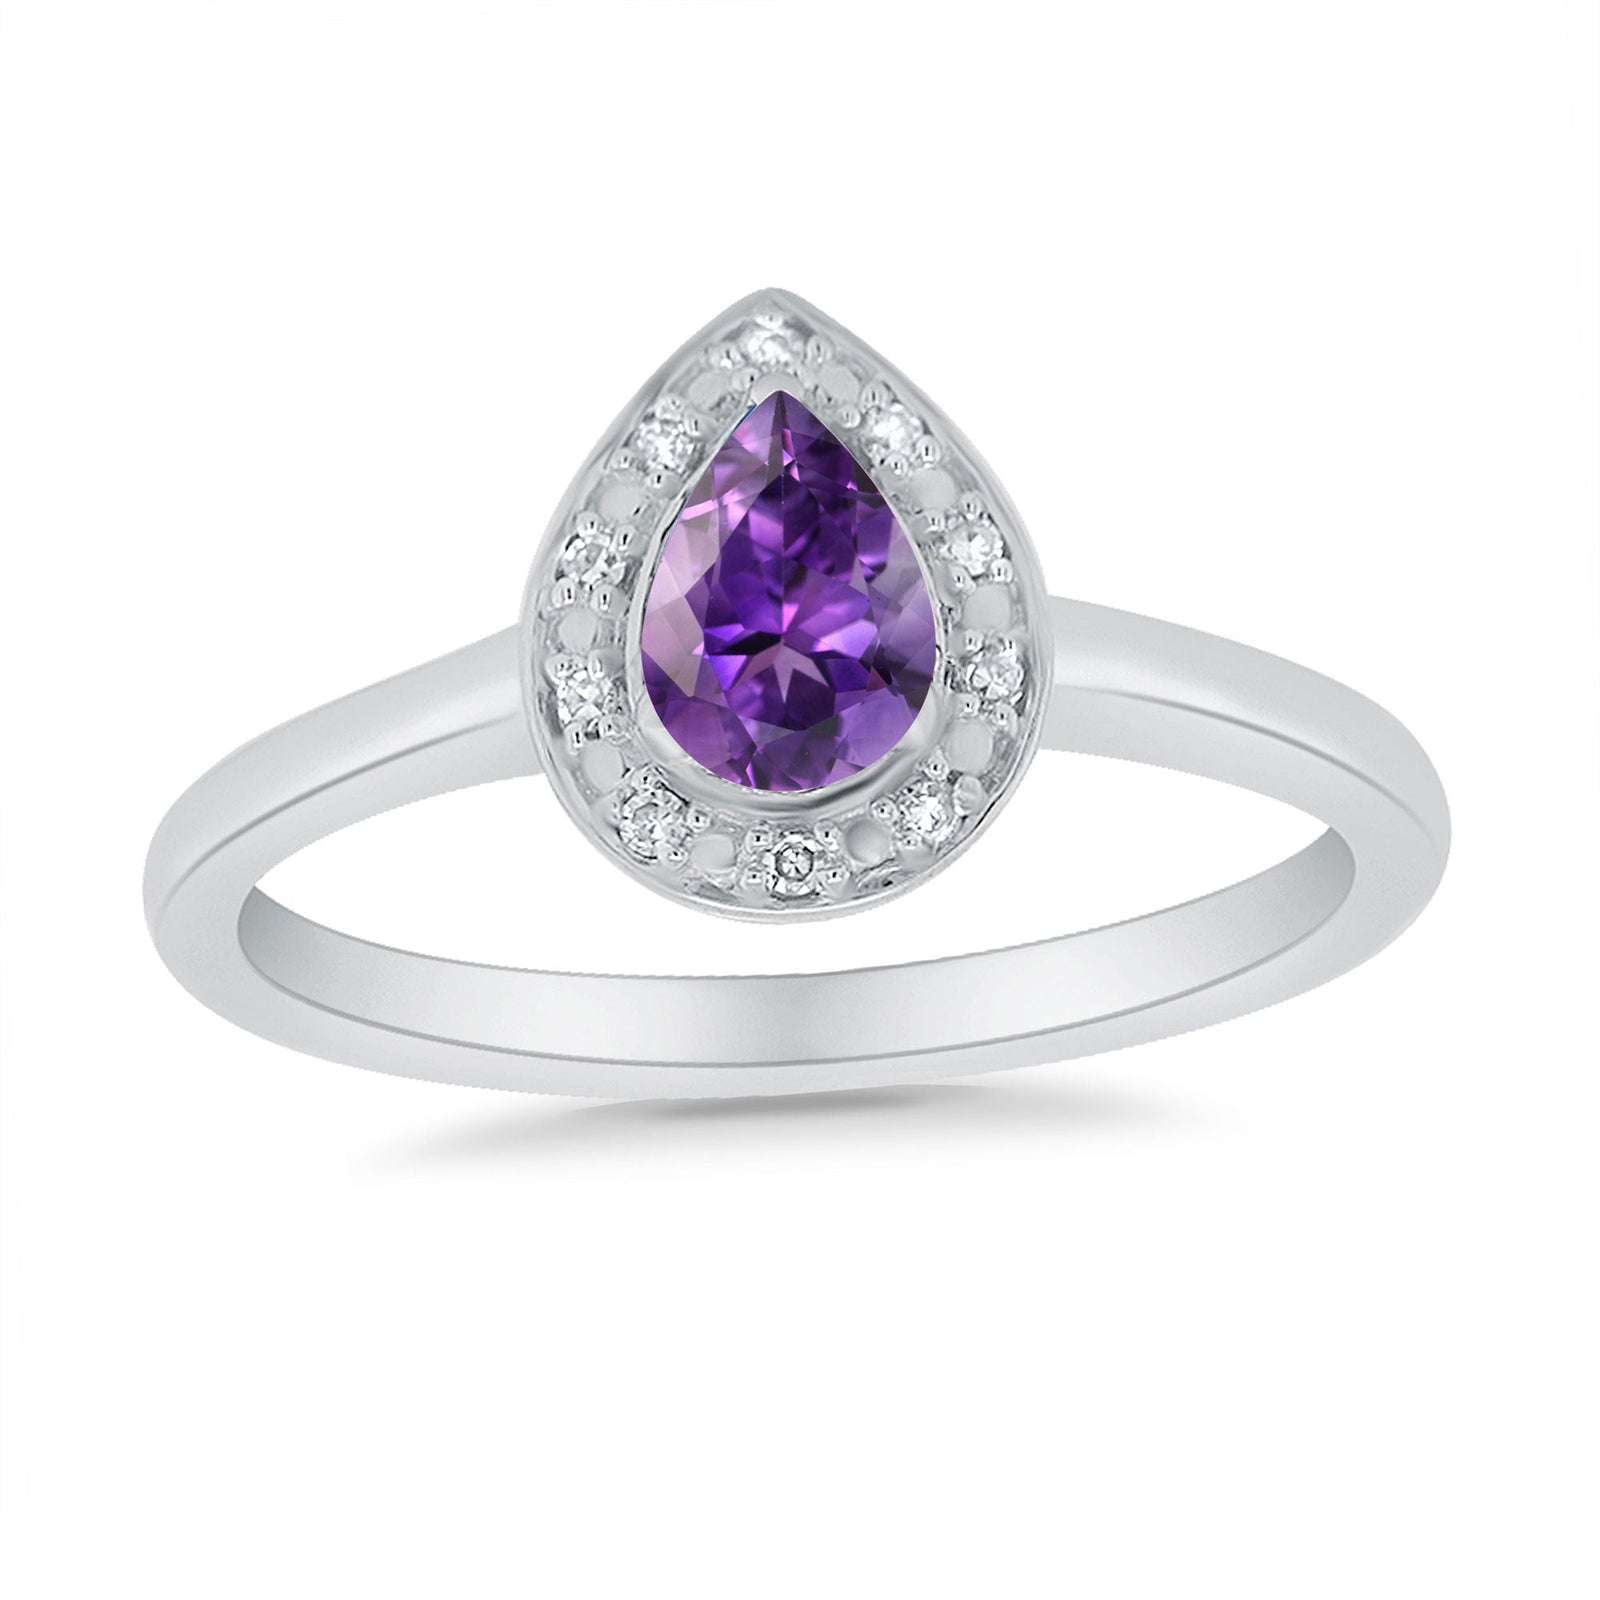 9ct white gold 6x4mm pear shape amethyst & diamond cluster ring 0.04ct